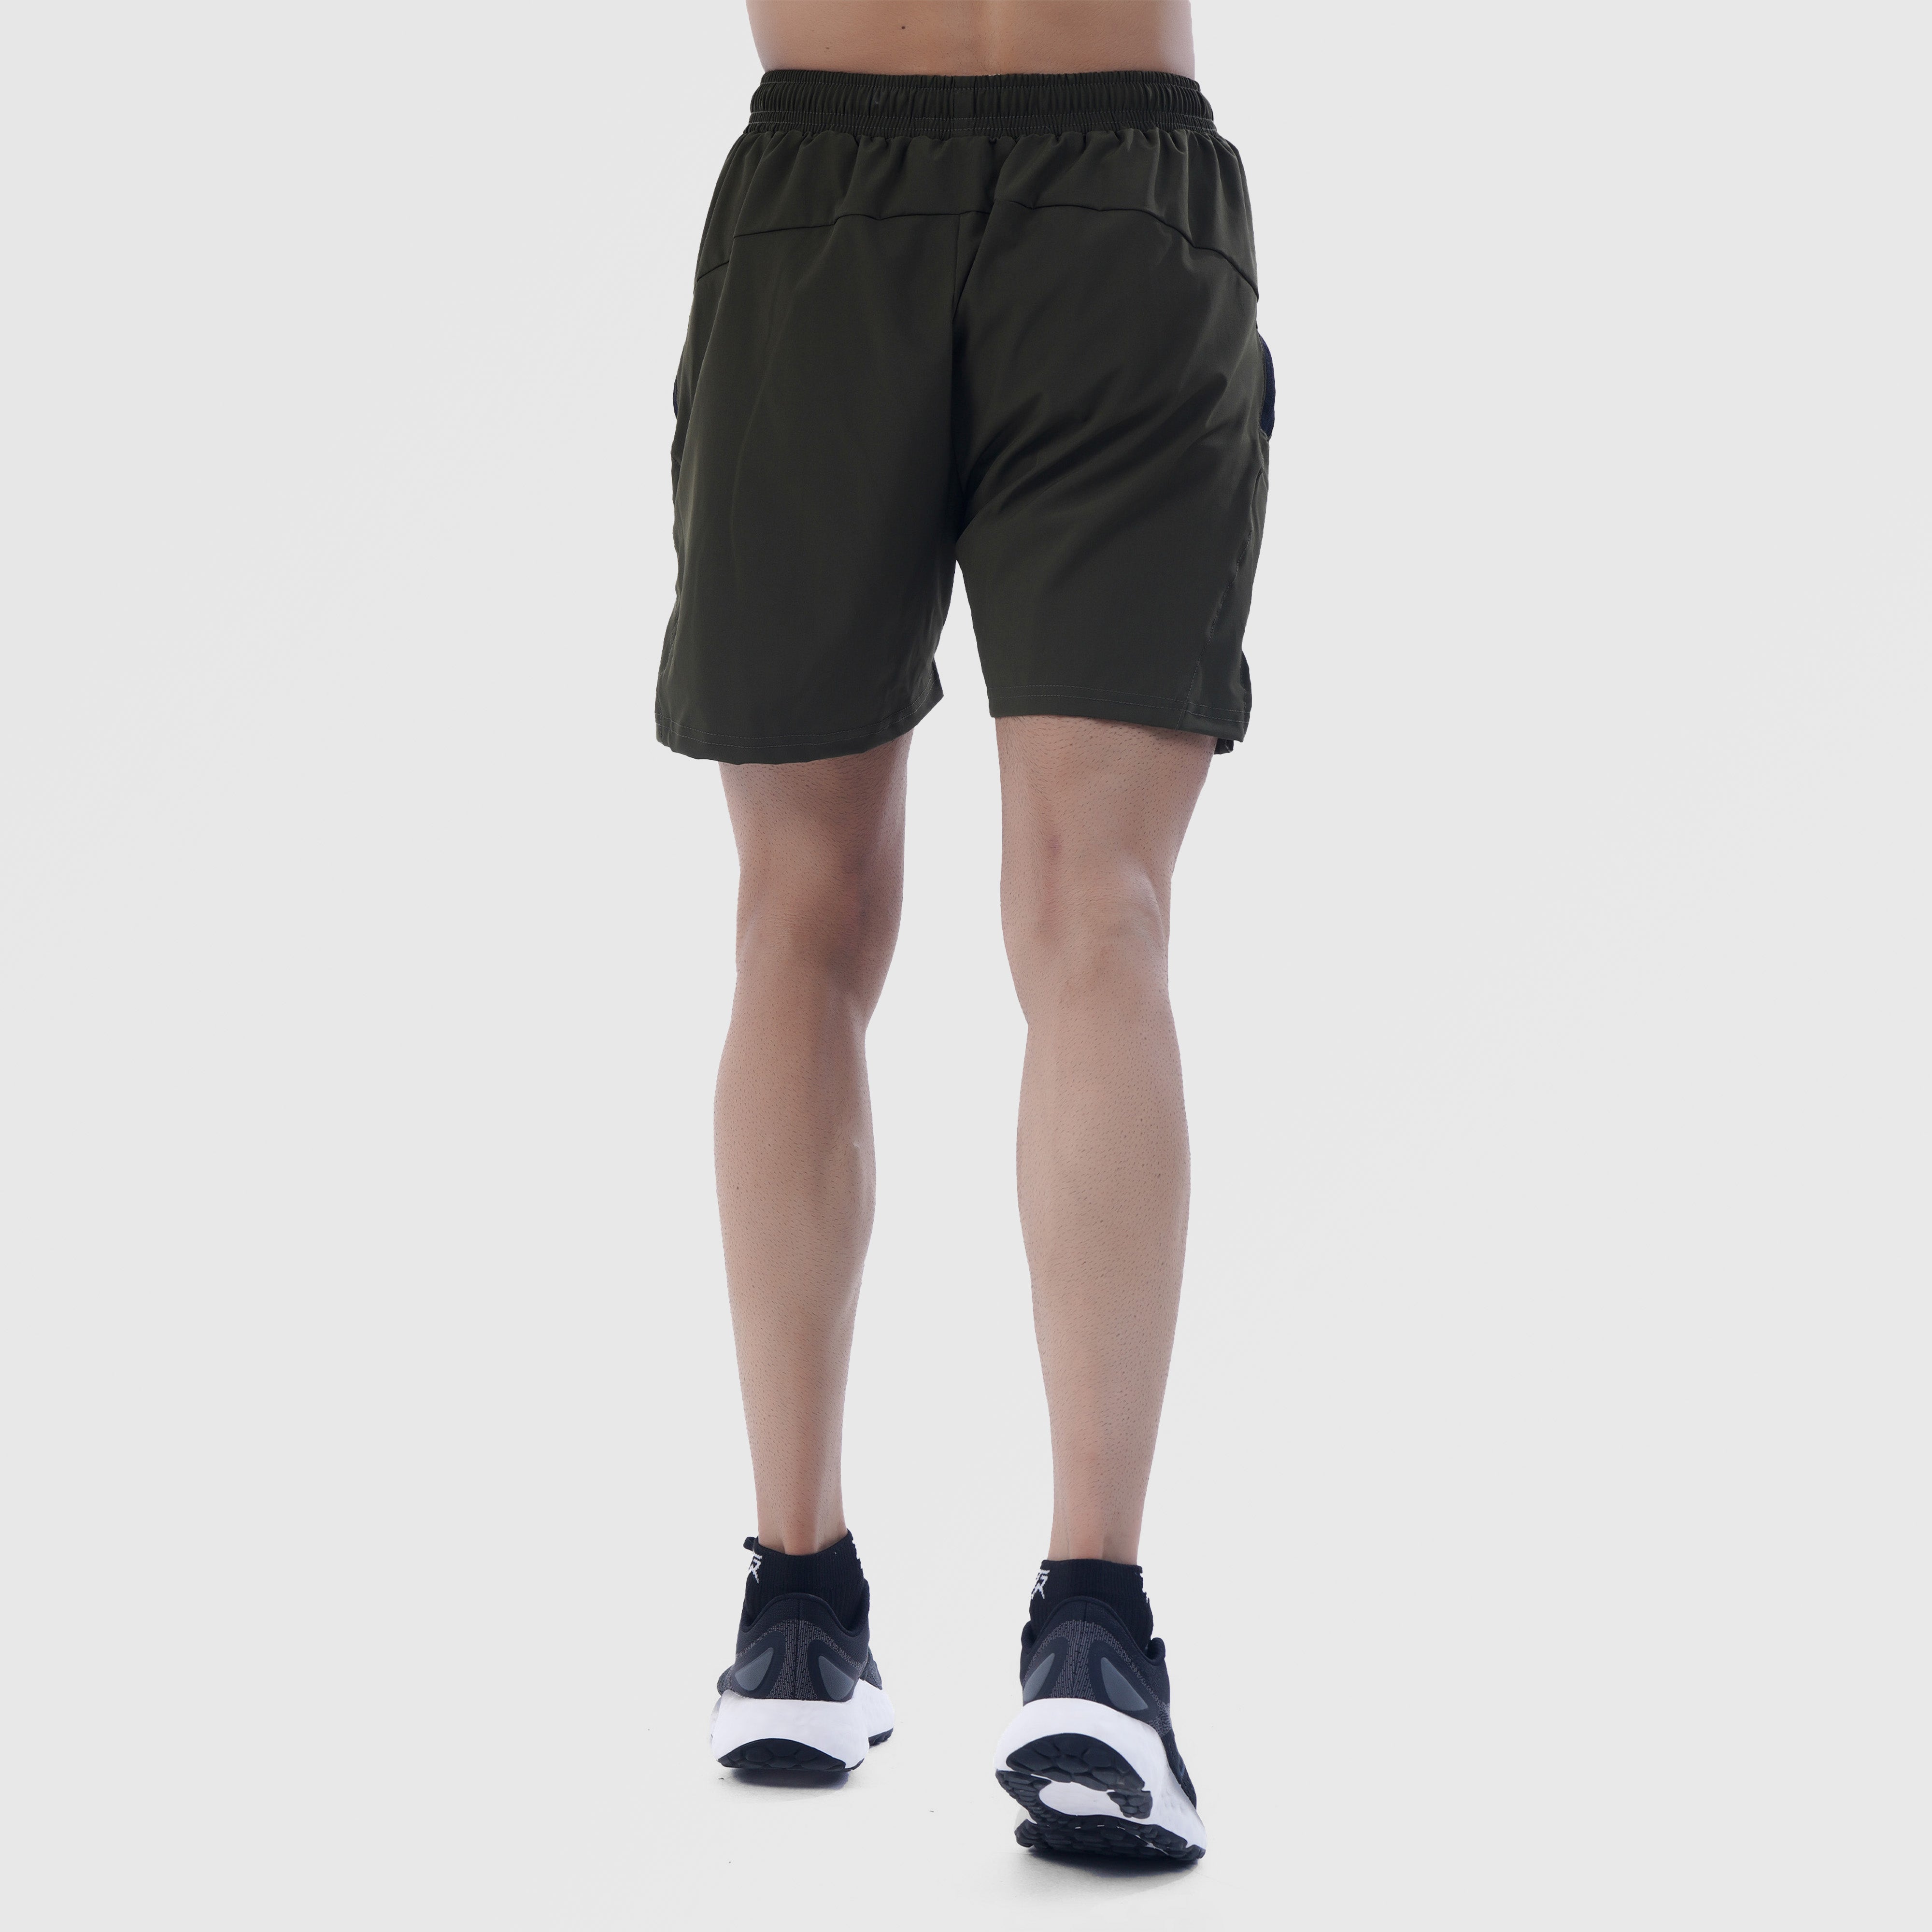 AirFlow Shorts (Olive)